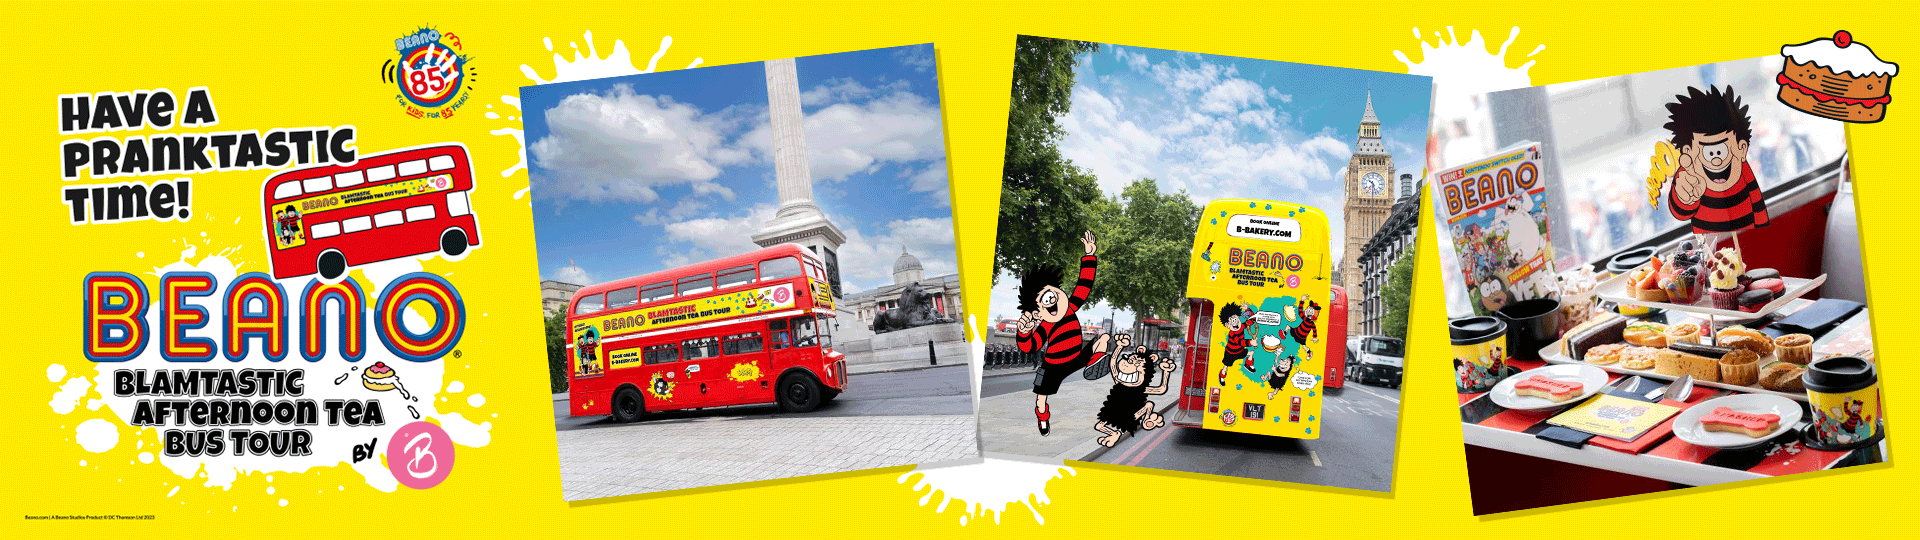 Beano Blamtastic Afternoon Tea Bus Tour by Brigits